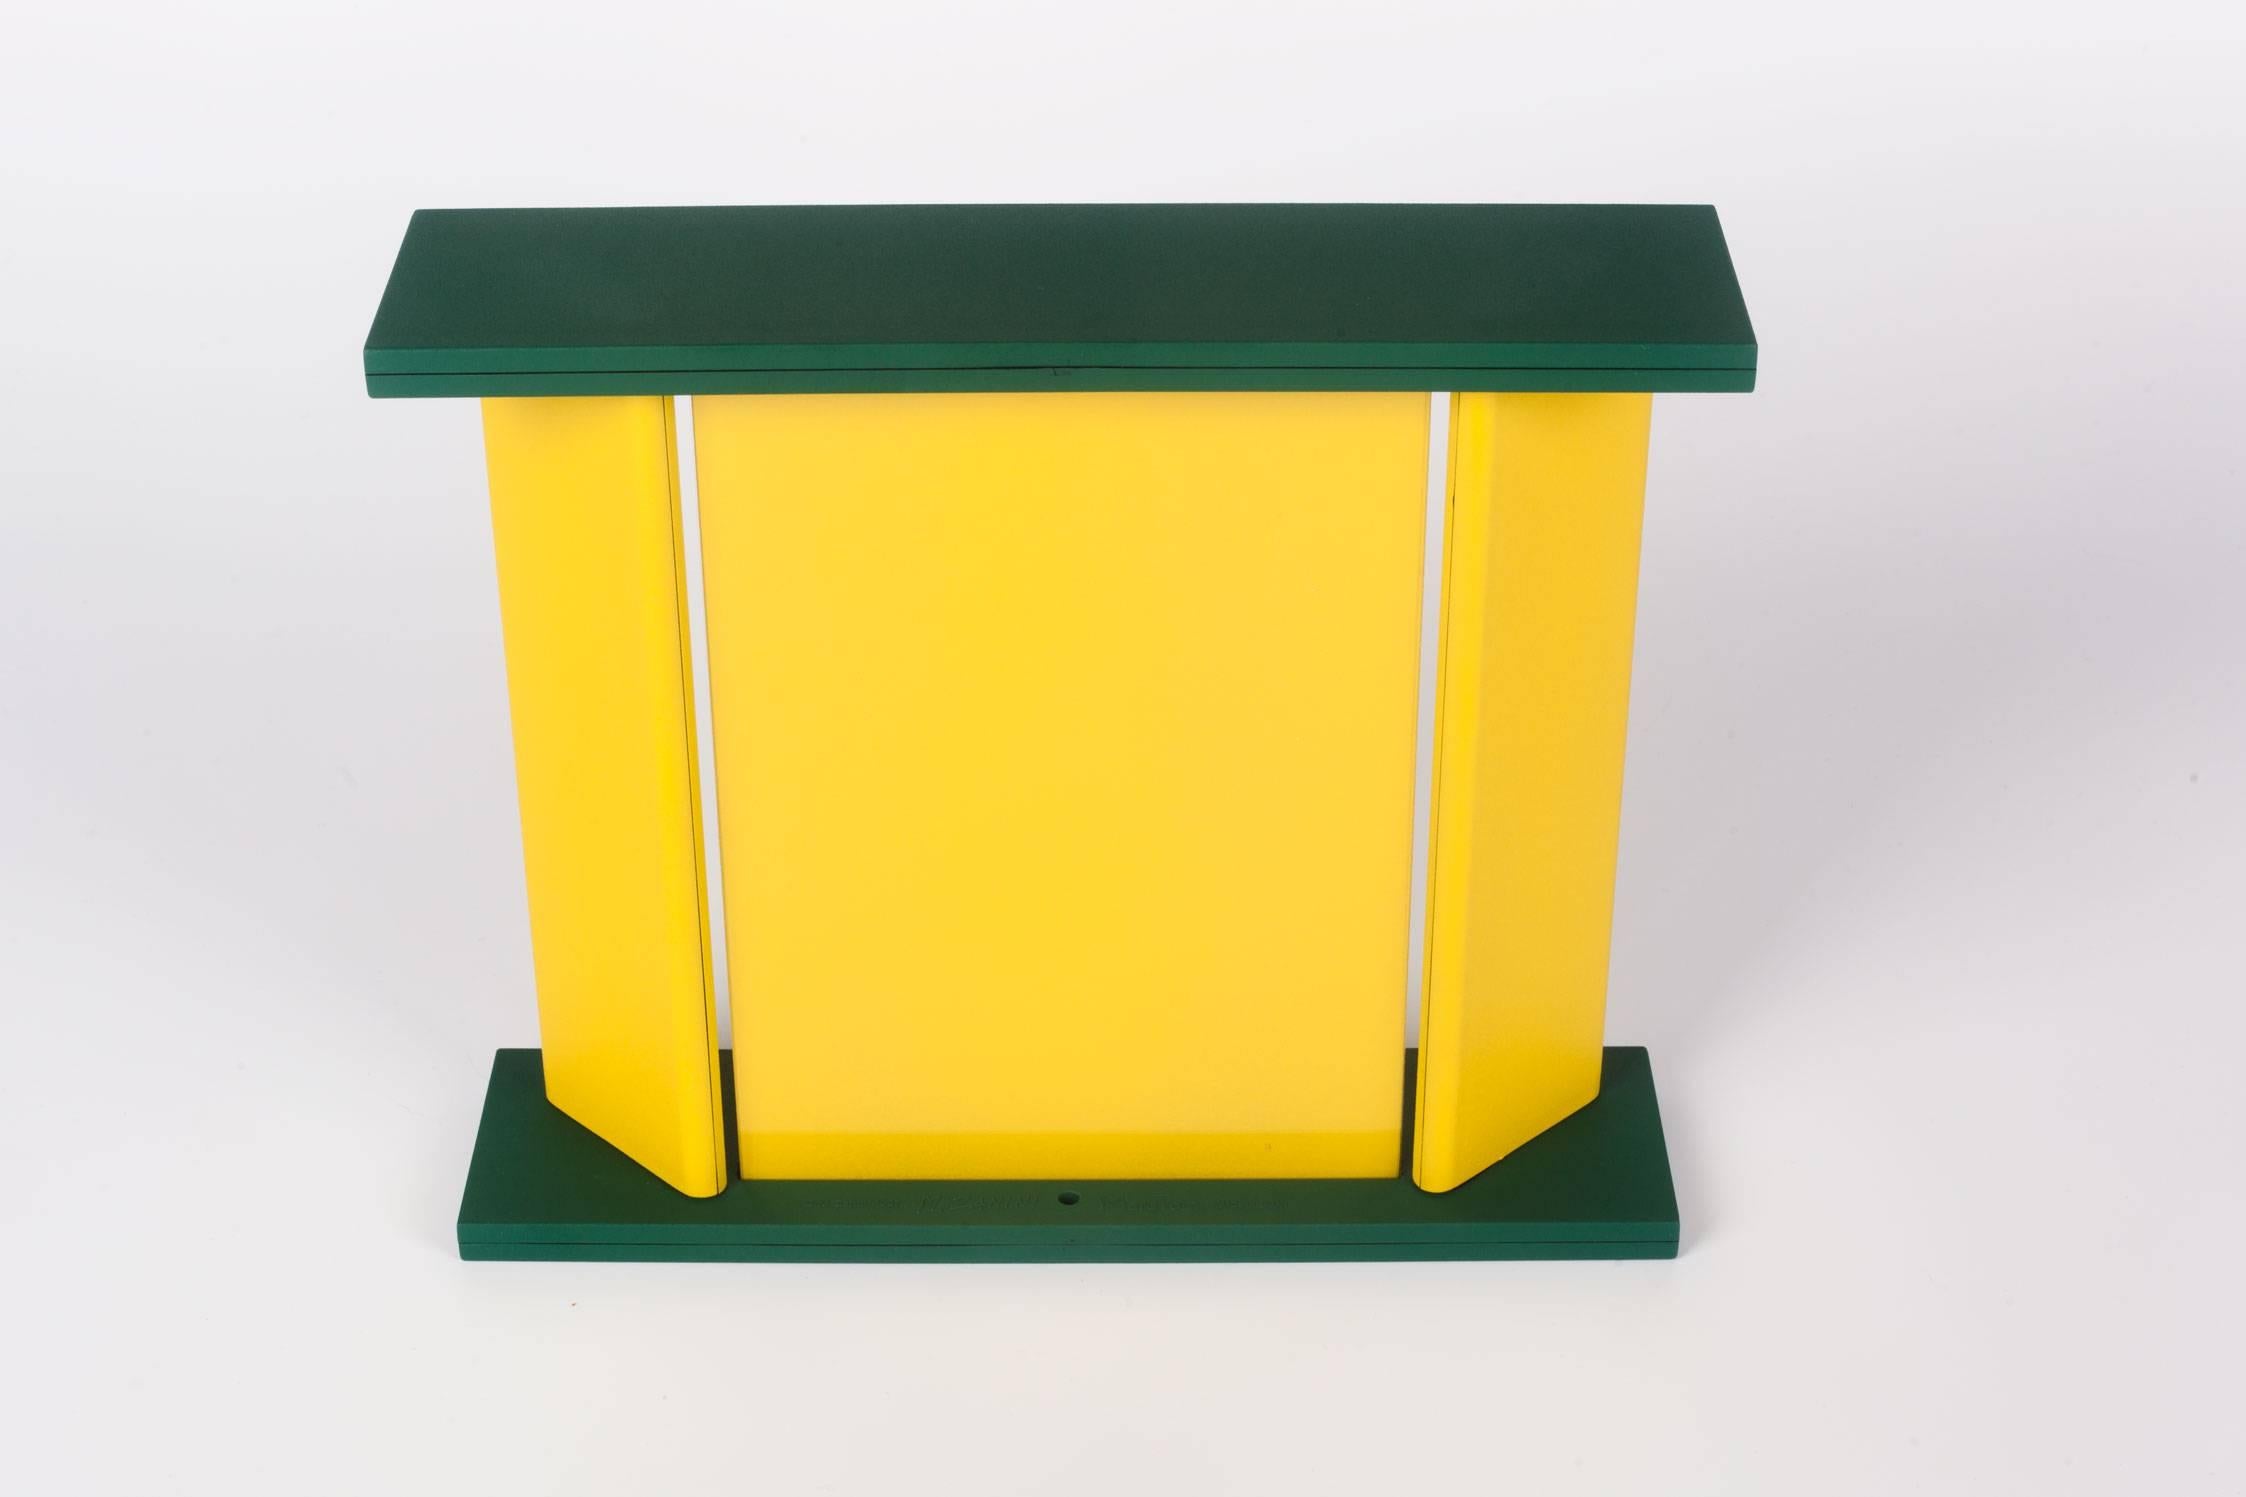 Memphis Green Yellow Table Mirror by Marco Zannini, 1990s (Postmoderne)